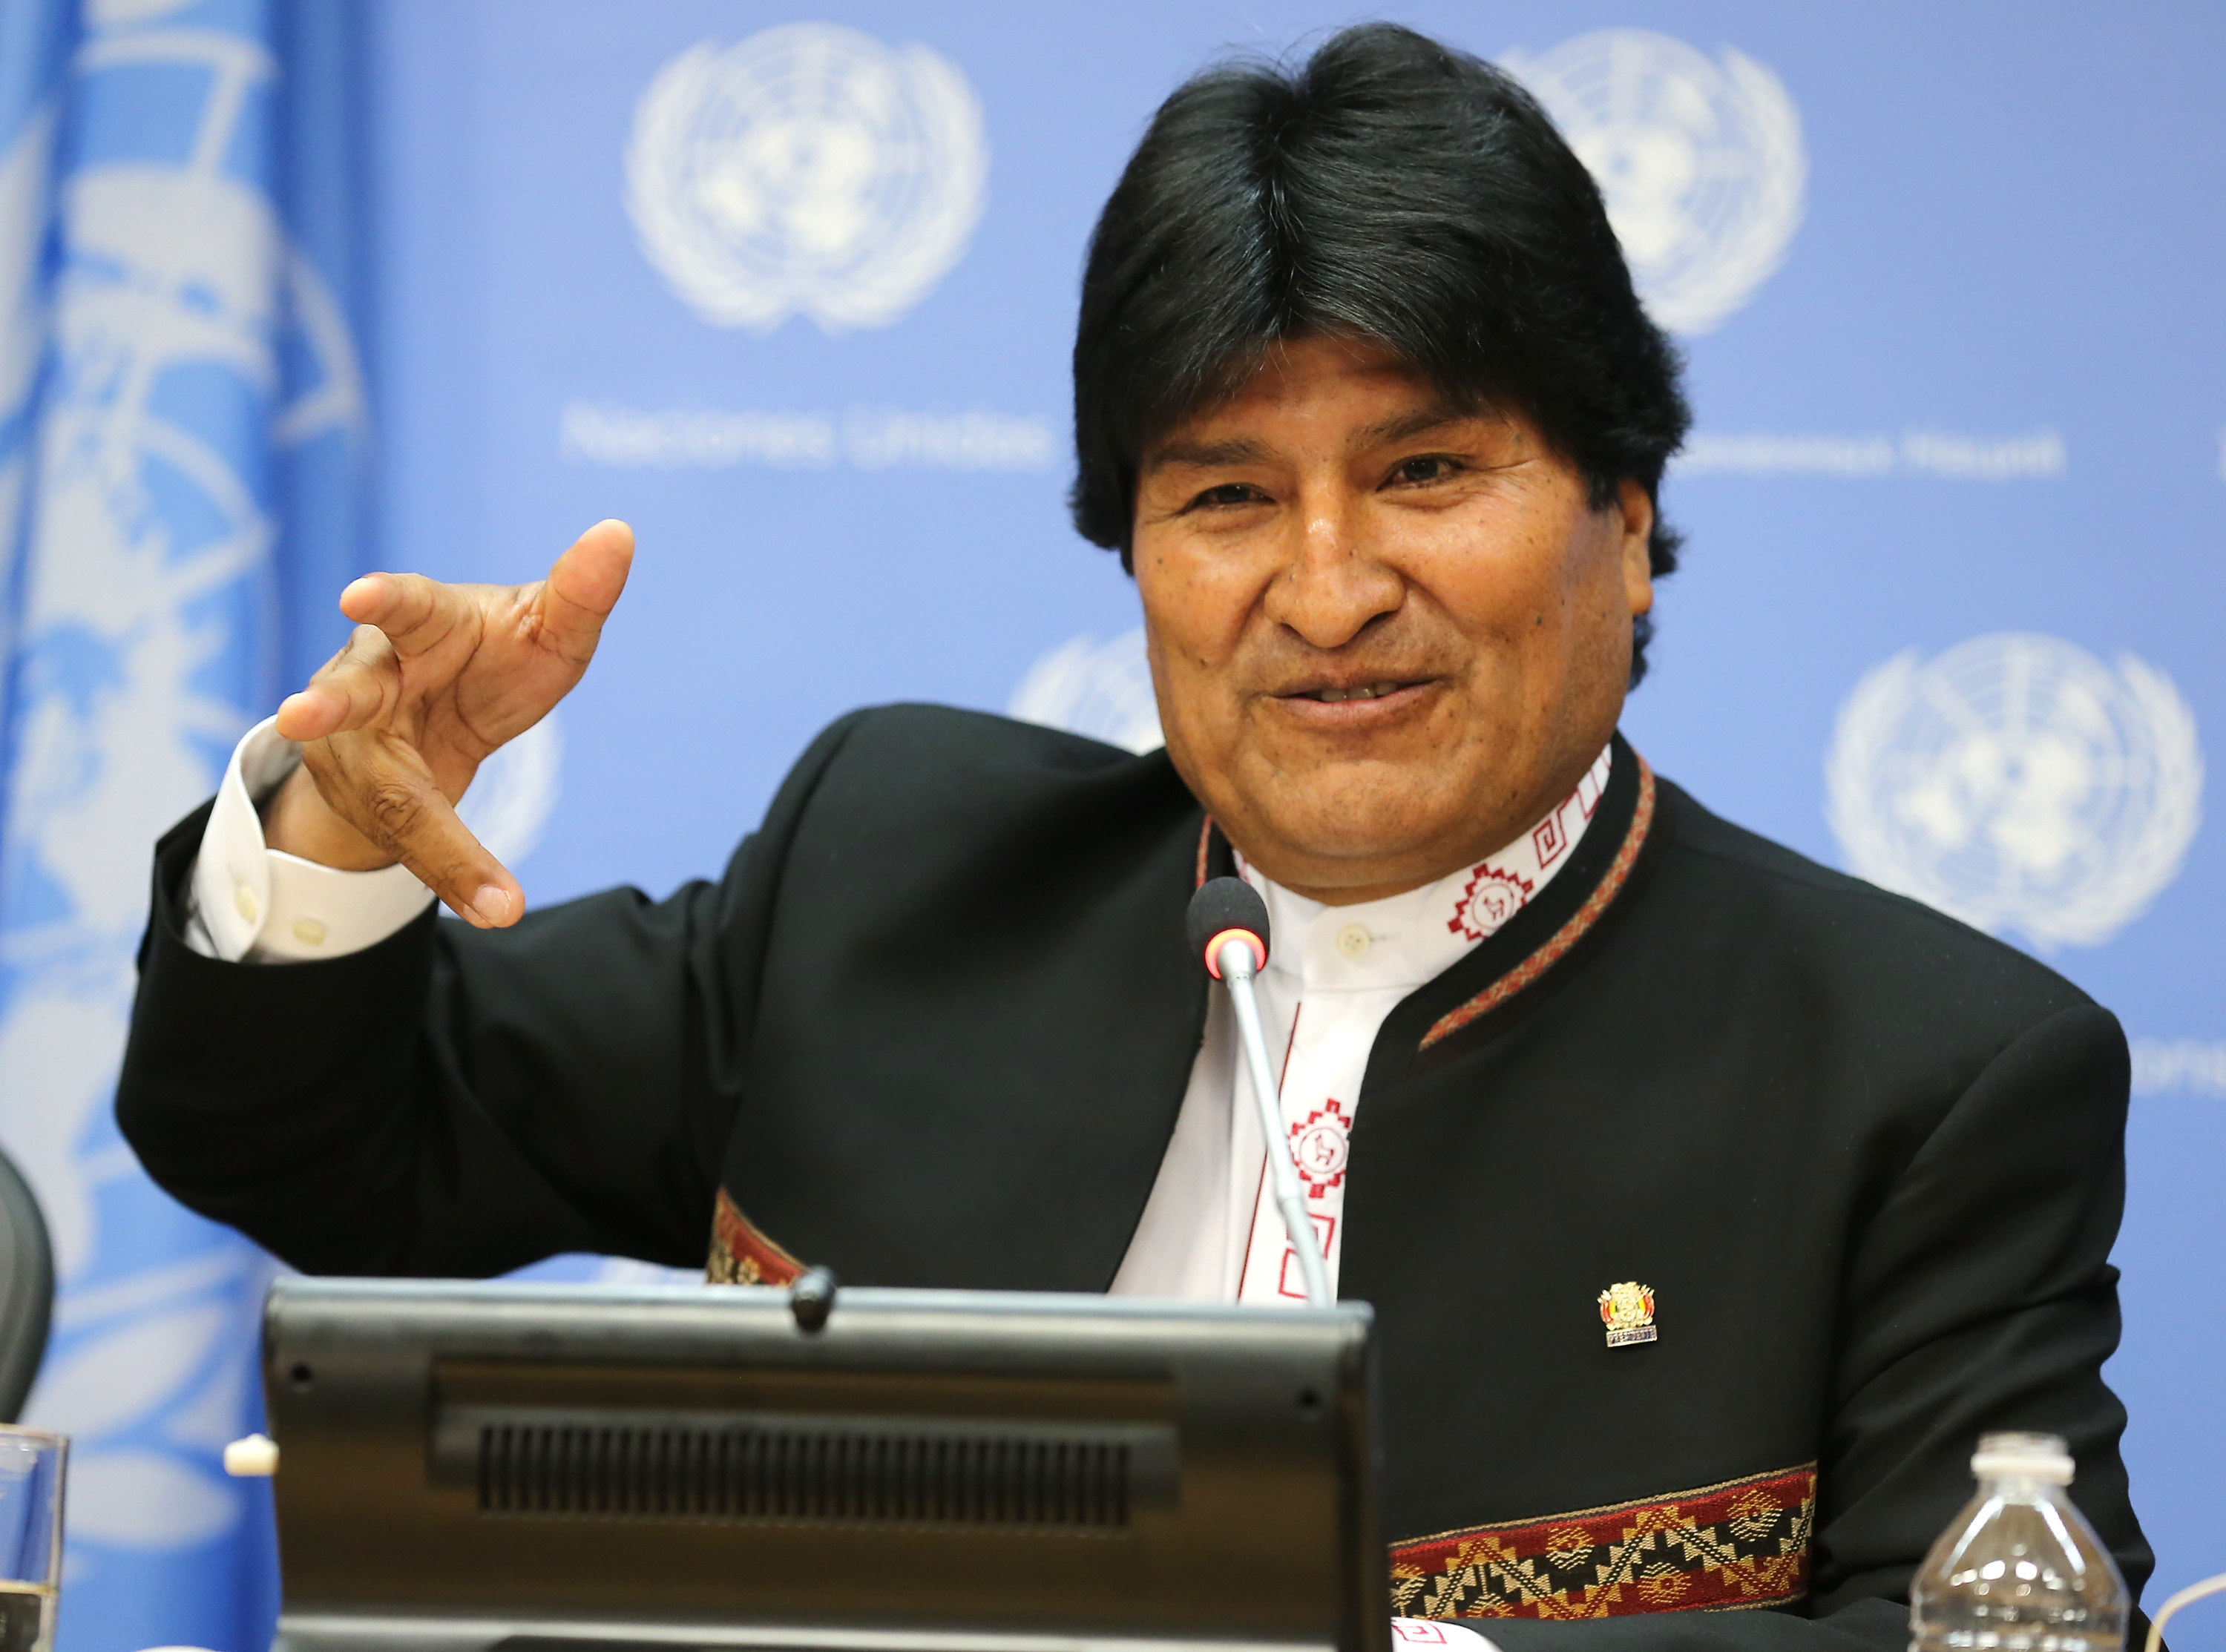 H.E. Evo Morales Ayma Attends A Special Session Of The UN General Assembly On The World Drug Problem